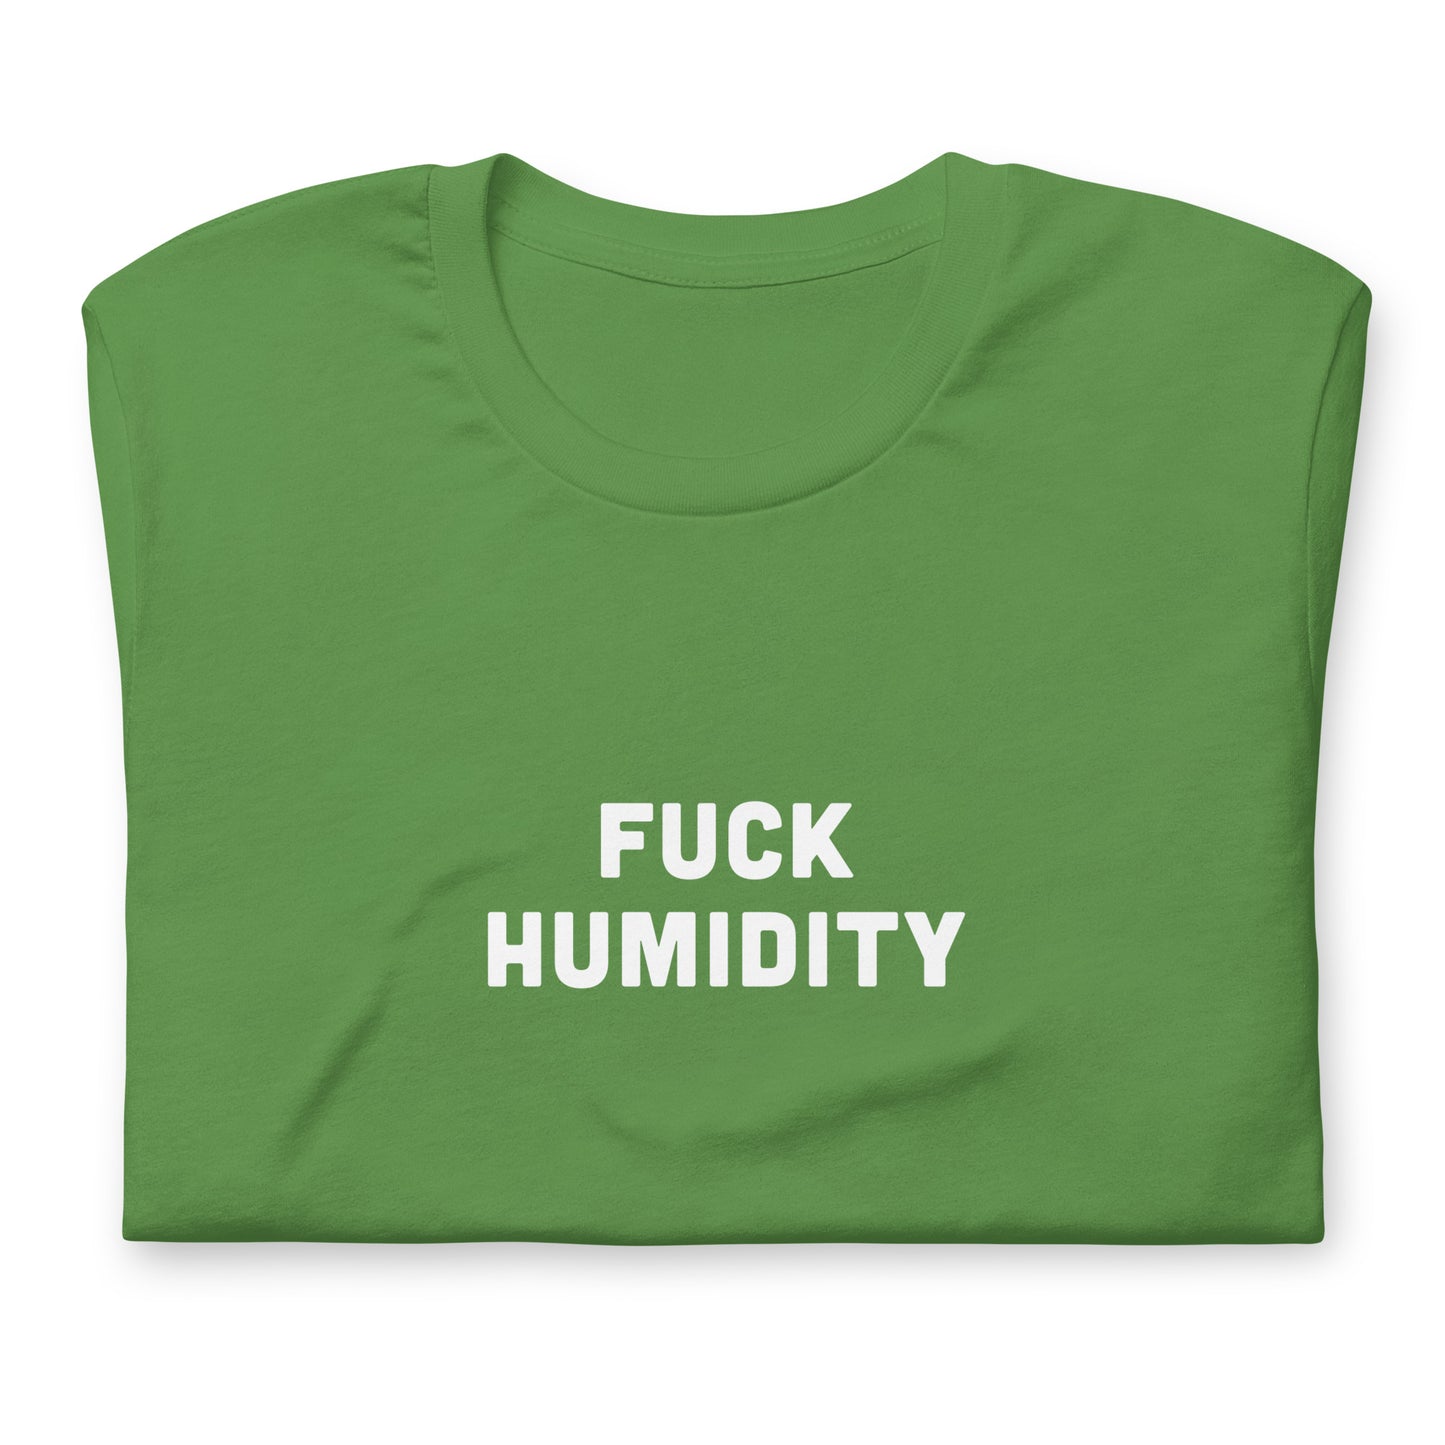 Fuck Humidity T-Shirt Size S Color Forest